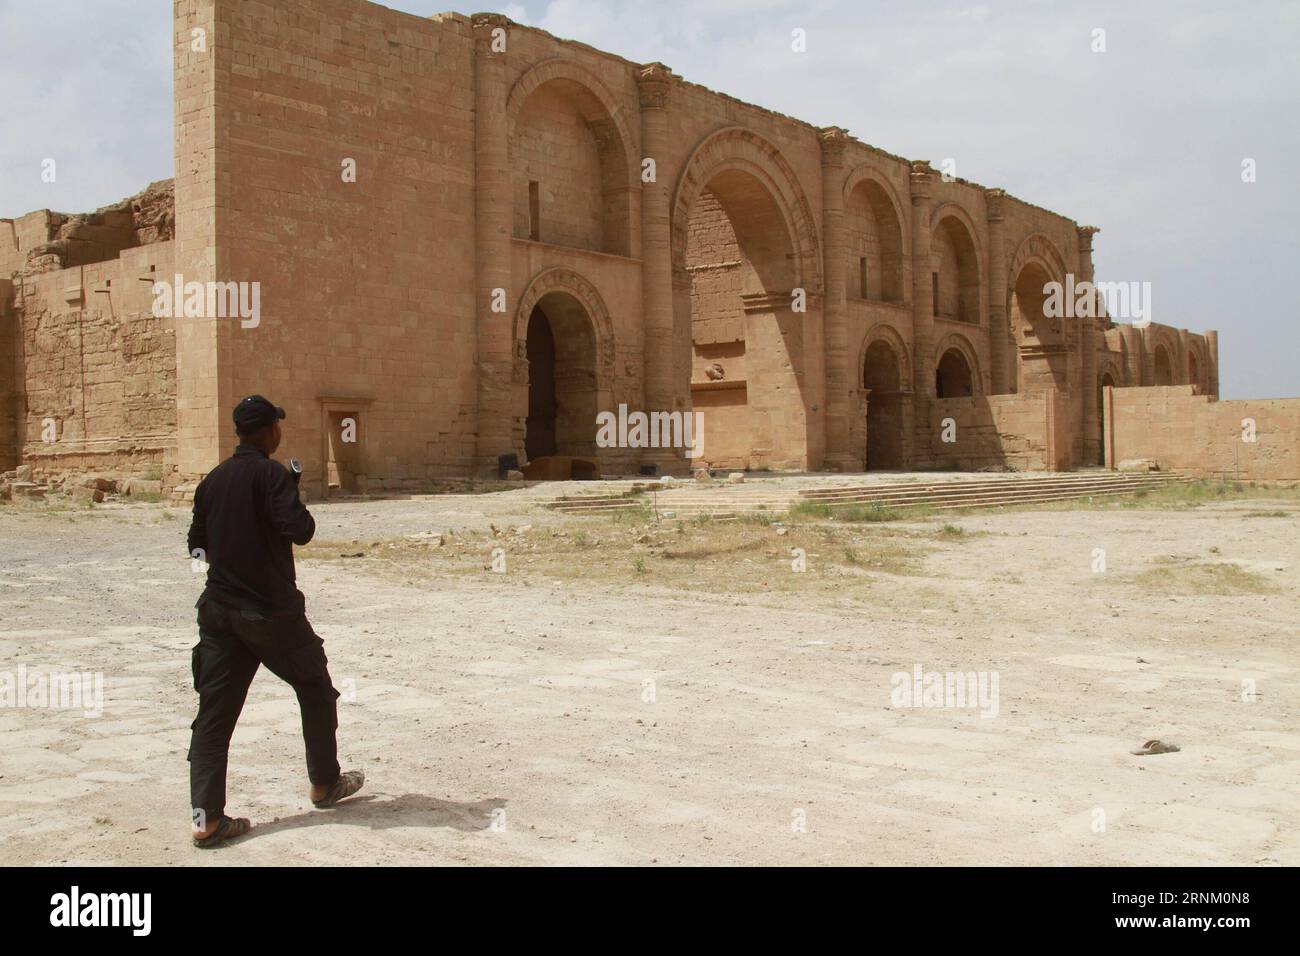 (170428) -- BAGHDAD, April 28, 2017 -- An Iraqi paramilitary soldier patrols at the ancient Hatra city in the south of Nineveh province, Iraq, on April 28, 2017. Iraqi paramilitary units, known as Hashd Shaabi, on Wednesday retook control of ancient remains of the Hatra city in south of Iraq s northern province of Nineveh after clashes with Islamic State (IS) militants, the paramilitary units said. ) IRAQ-NINEVEH-ANCIENT SITE OF HATRA-IRAQI FORCES-SEIZING YaserxJawad PUBLICATIONxNOTxINxCHN   Baghdad April 28 2017 to Iraqi paramilitary Soldier Patrol AT The Ancient Hatra City in The South of Ni Stock Photo